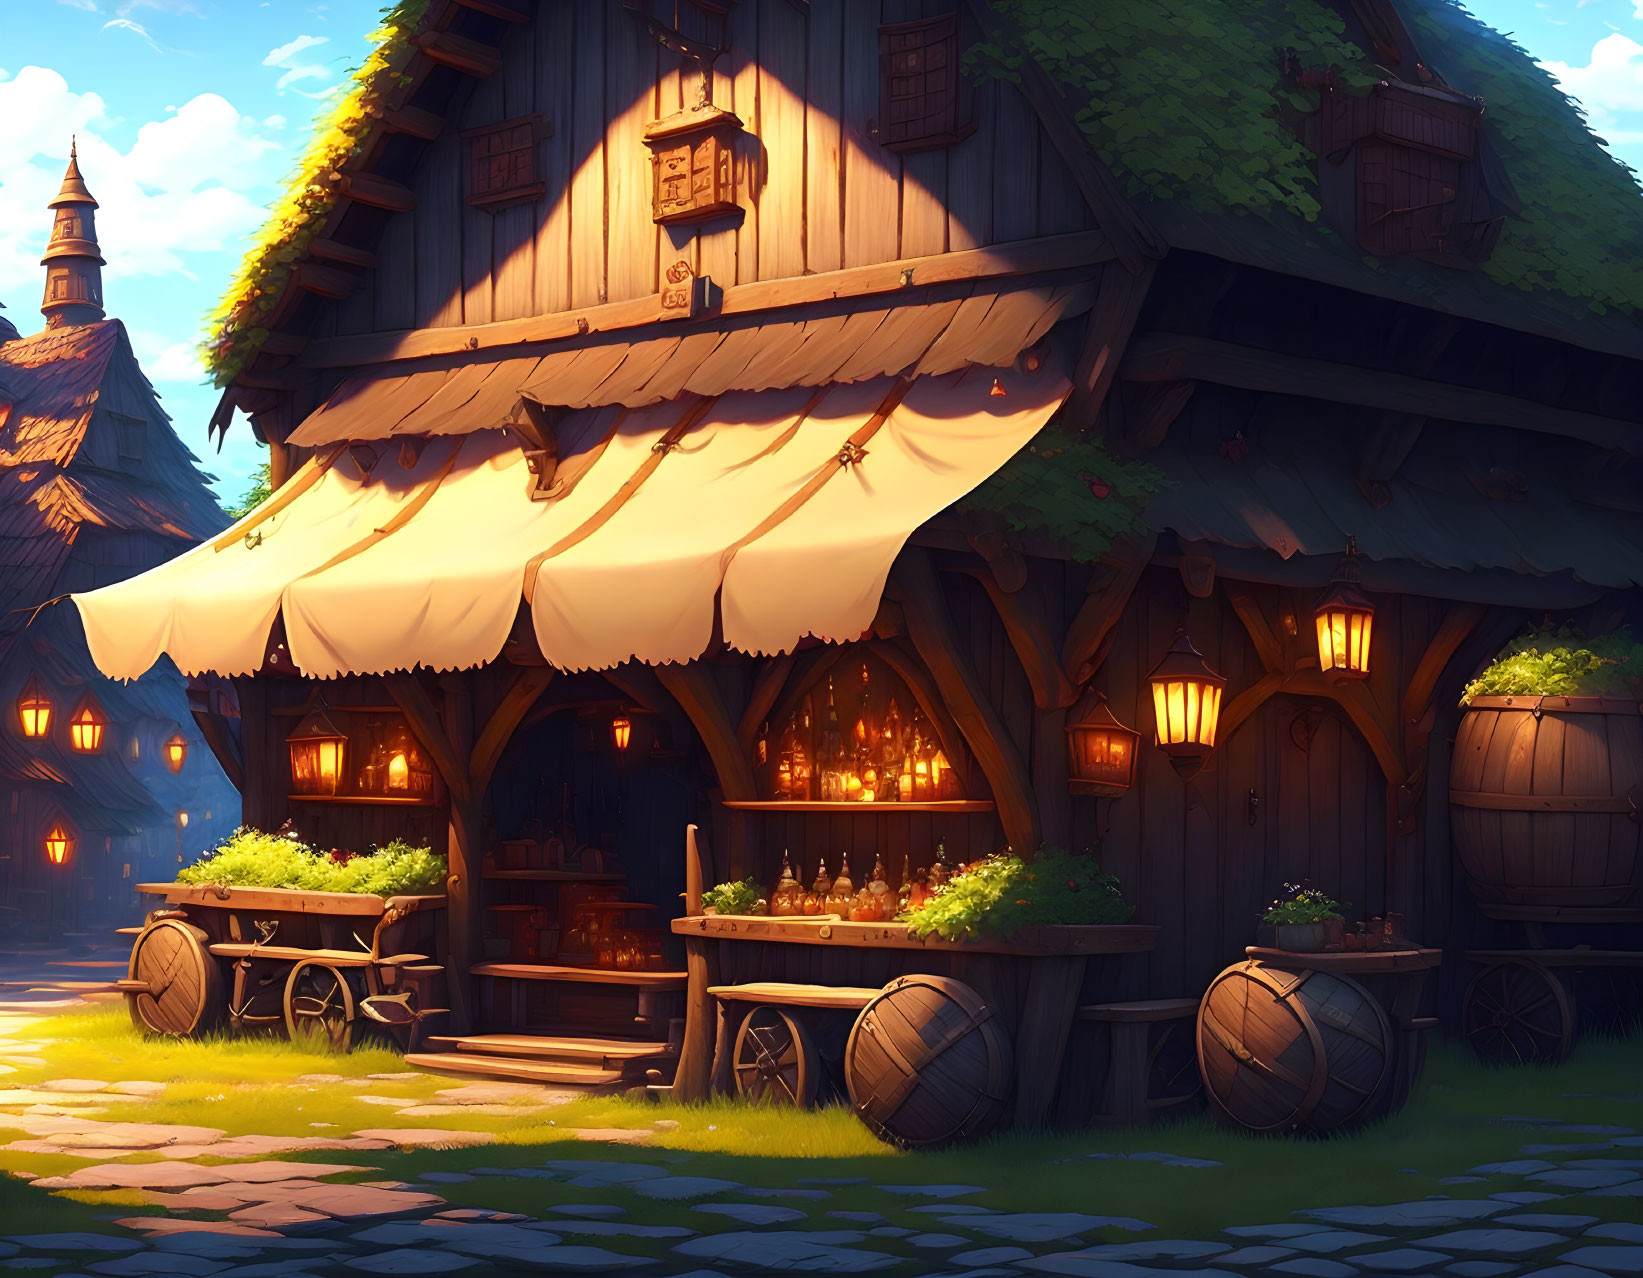 Medieval tavern scene with warm glow, barrels, greenery, and storybook vibe